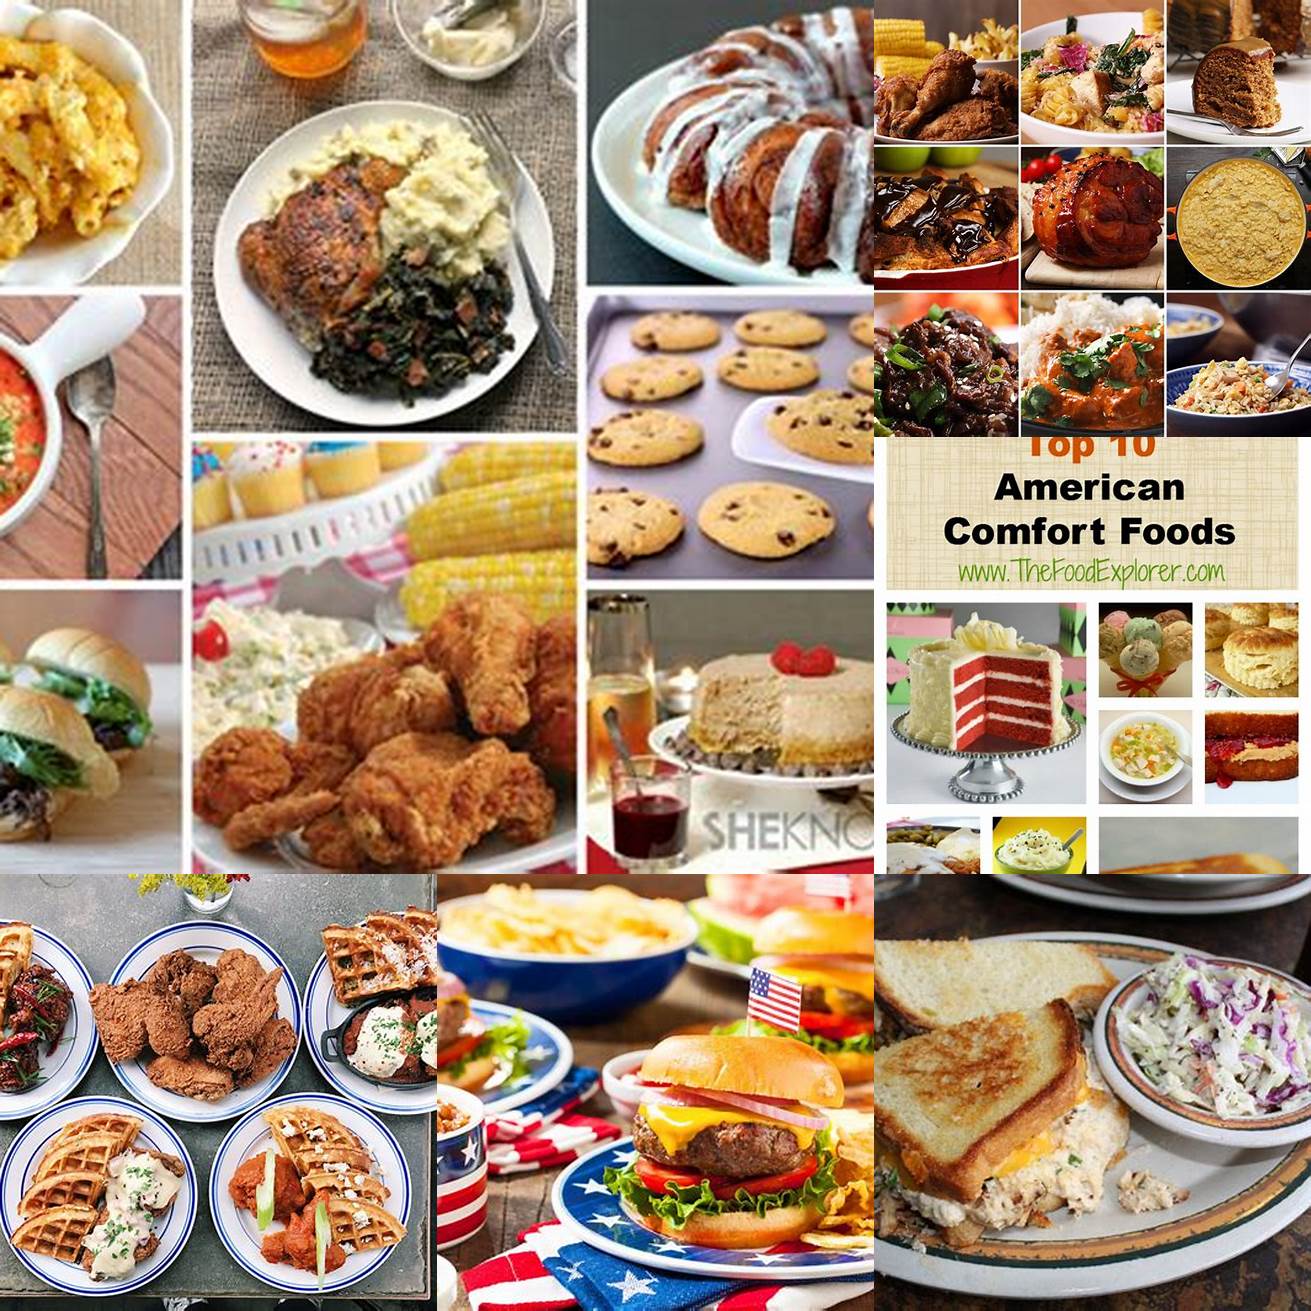 Comforting American cuisine is often associated with comfort food which can be a source of nostalgia and emotional comfort